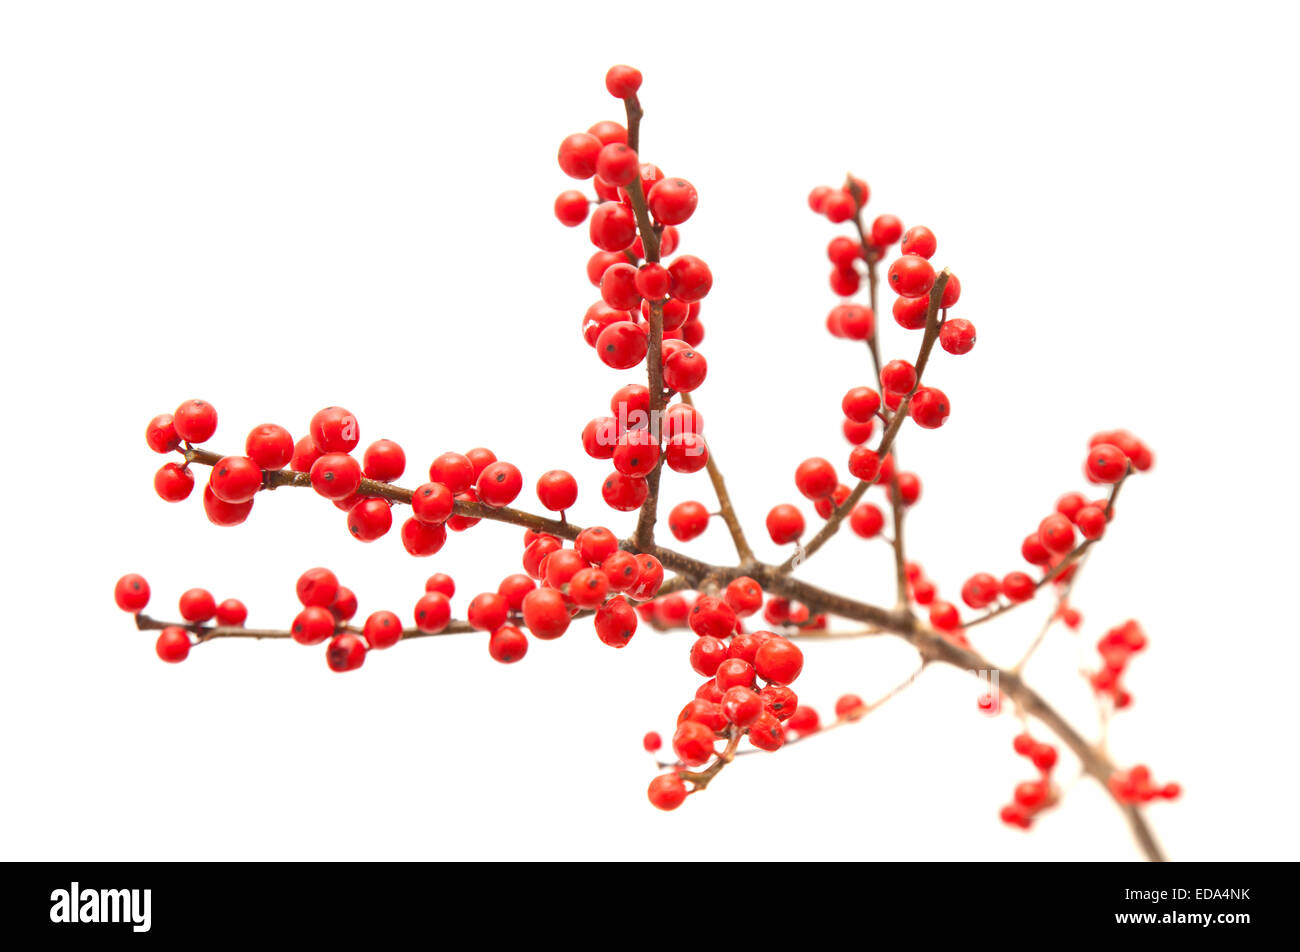 Winterberry Branches 